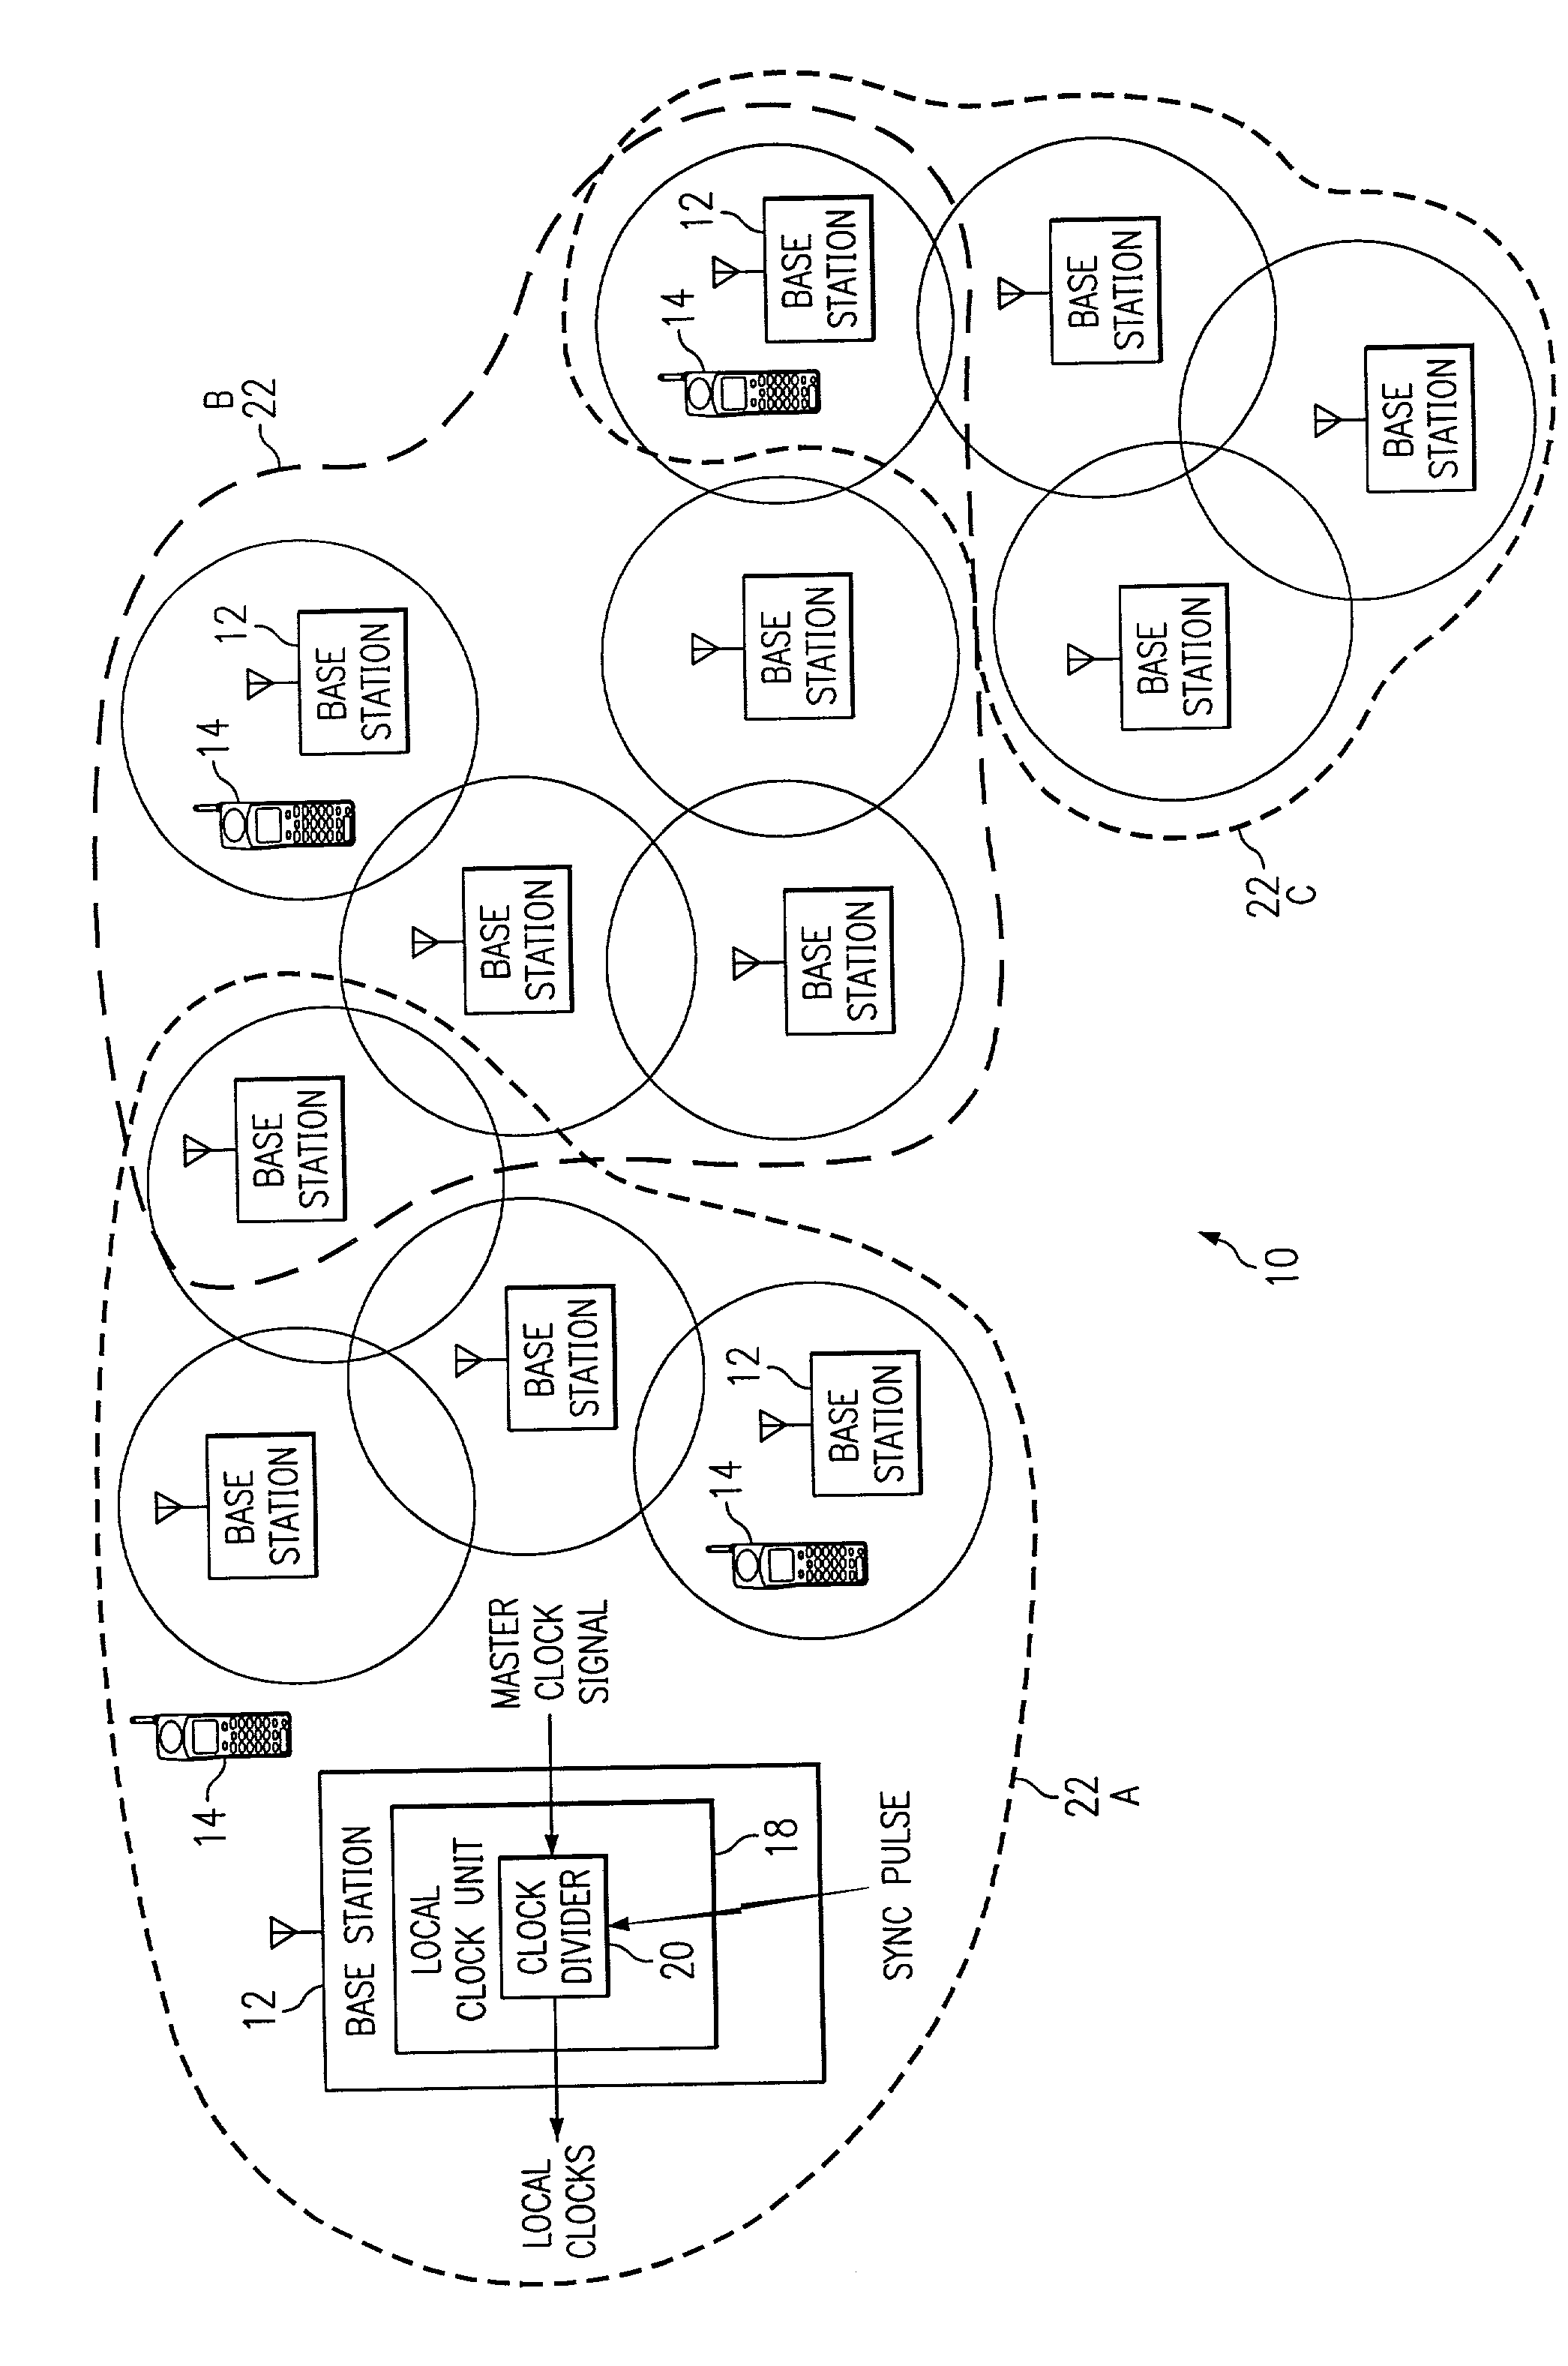 System and method for synchronizing clock dividers in a wireless network